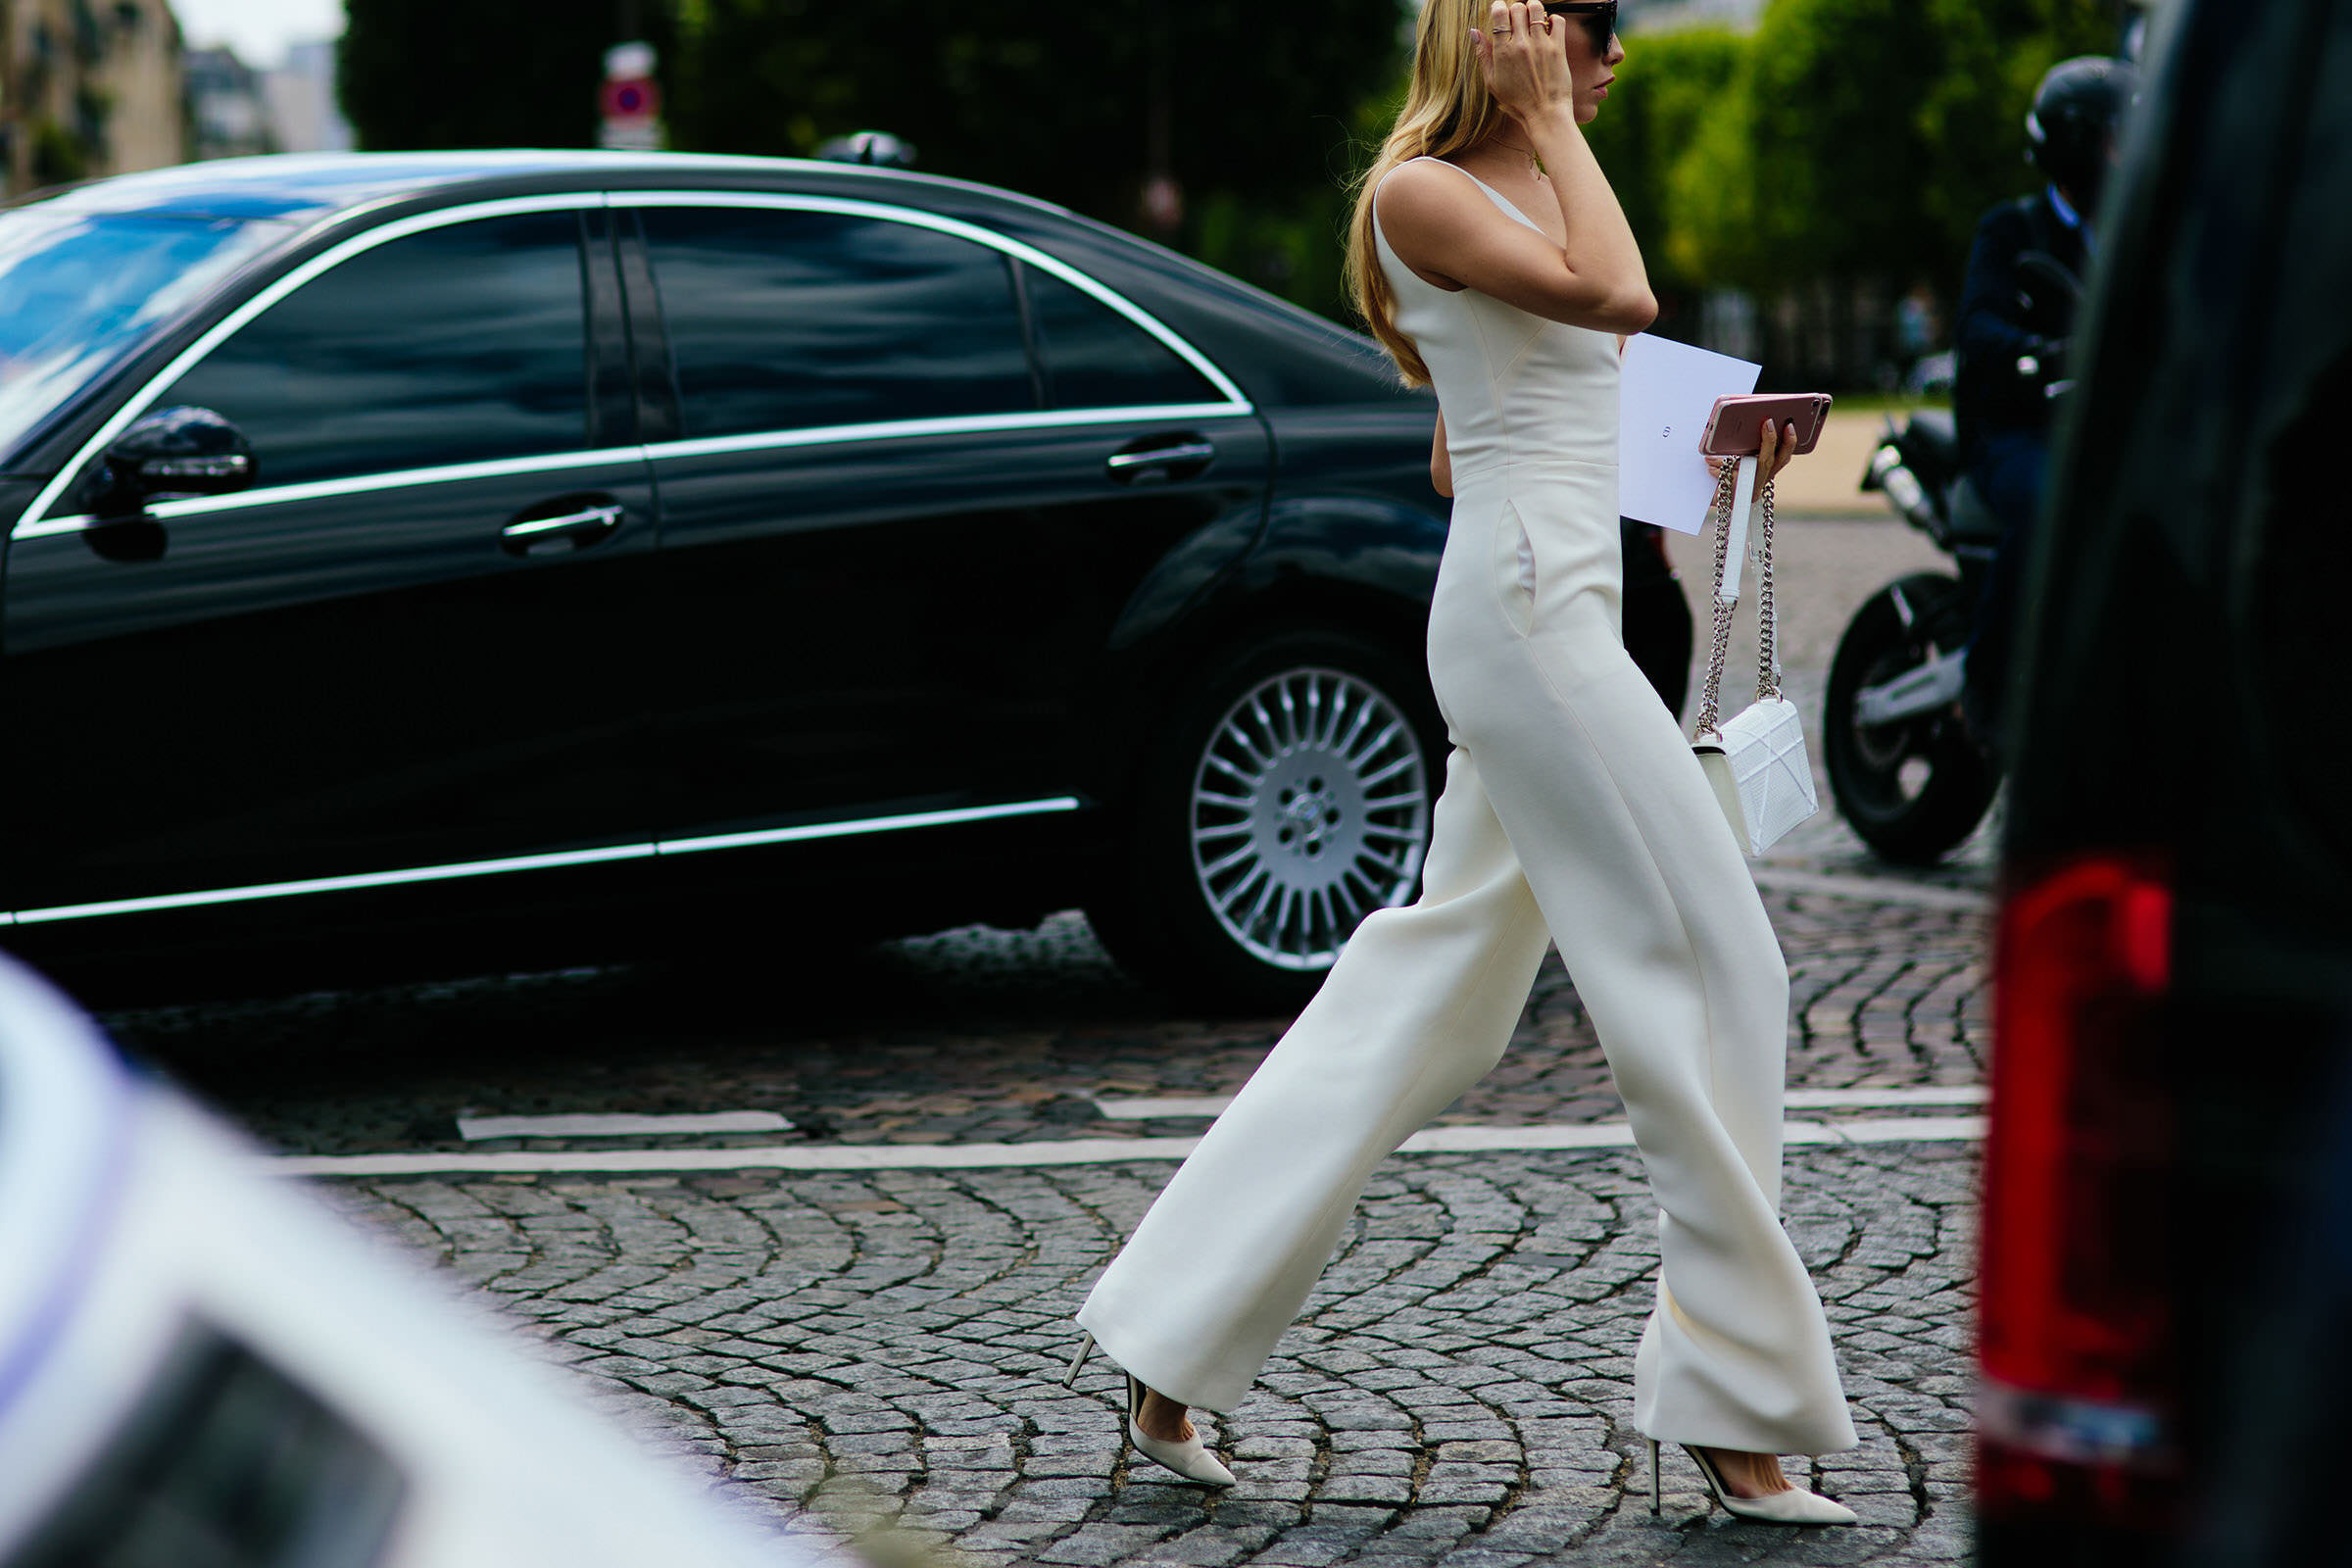 russian street style star wearing white outfit in paris